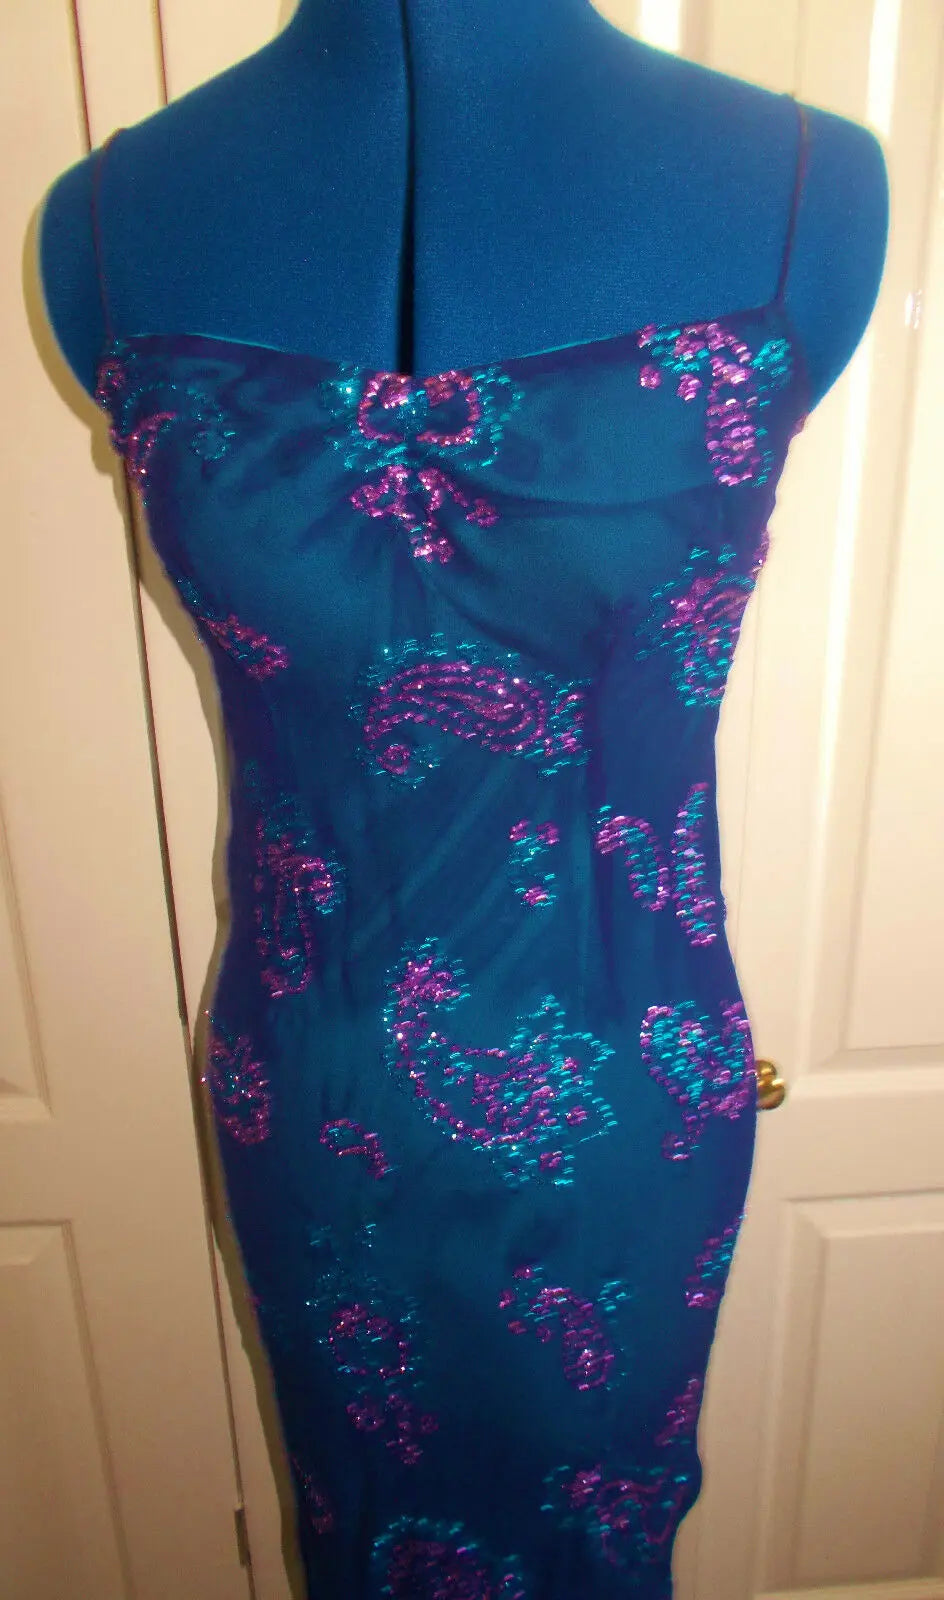 Vintage Monsoon purple dress-inlaid crystals.size 10/12 stretchy,calf length Monsoon